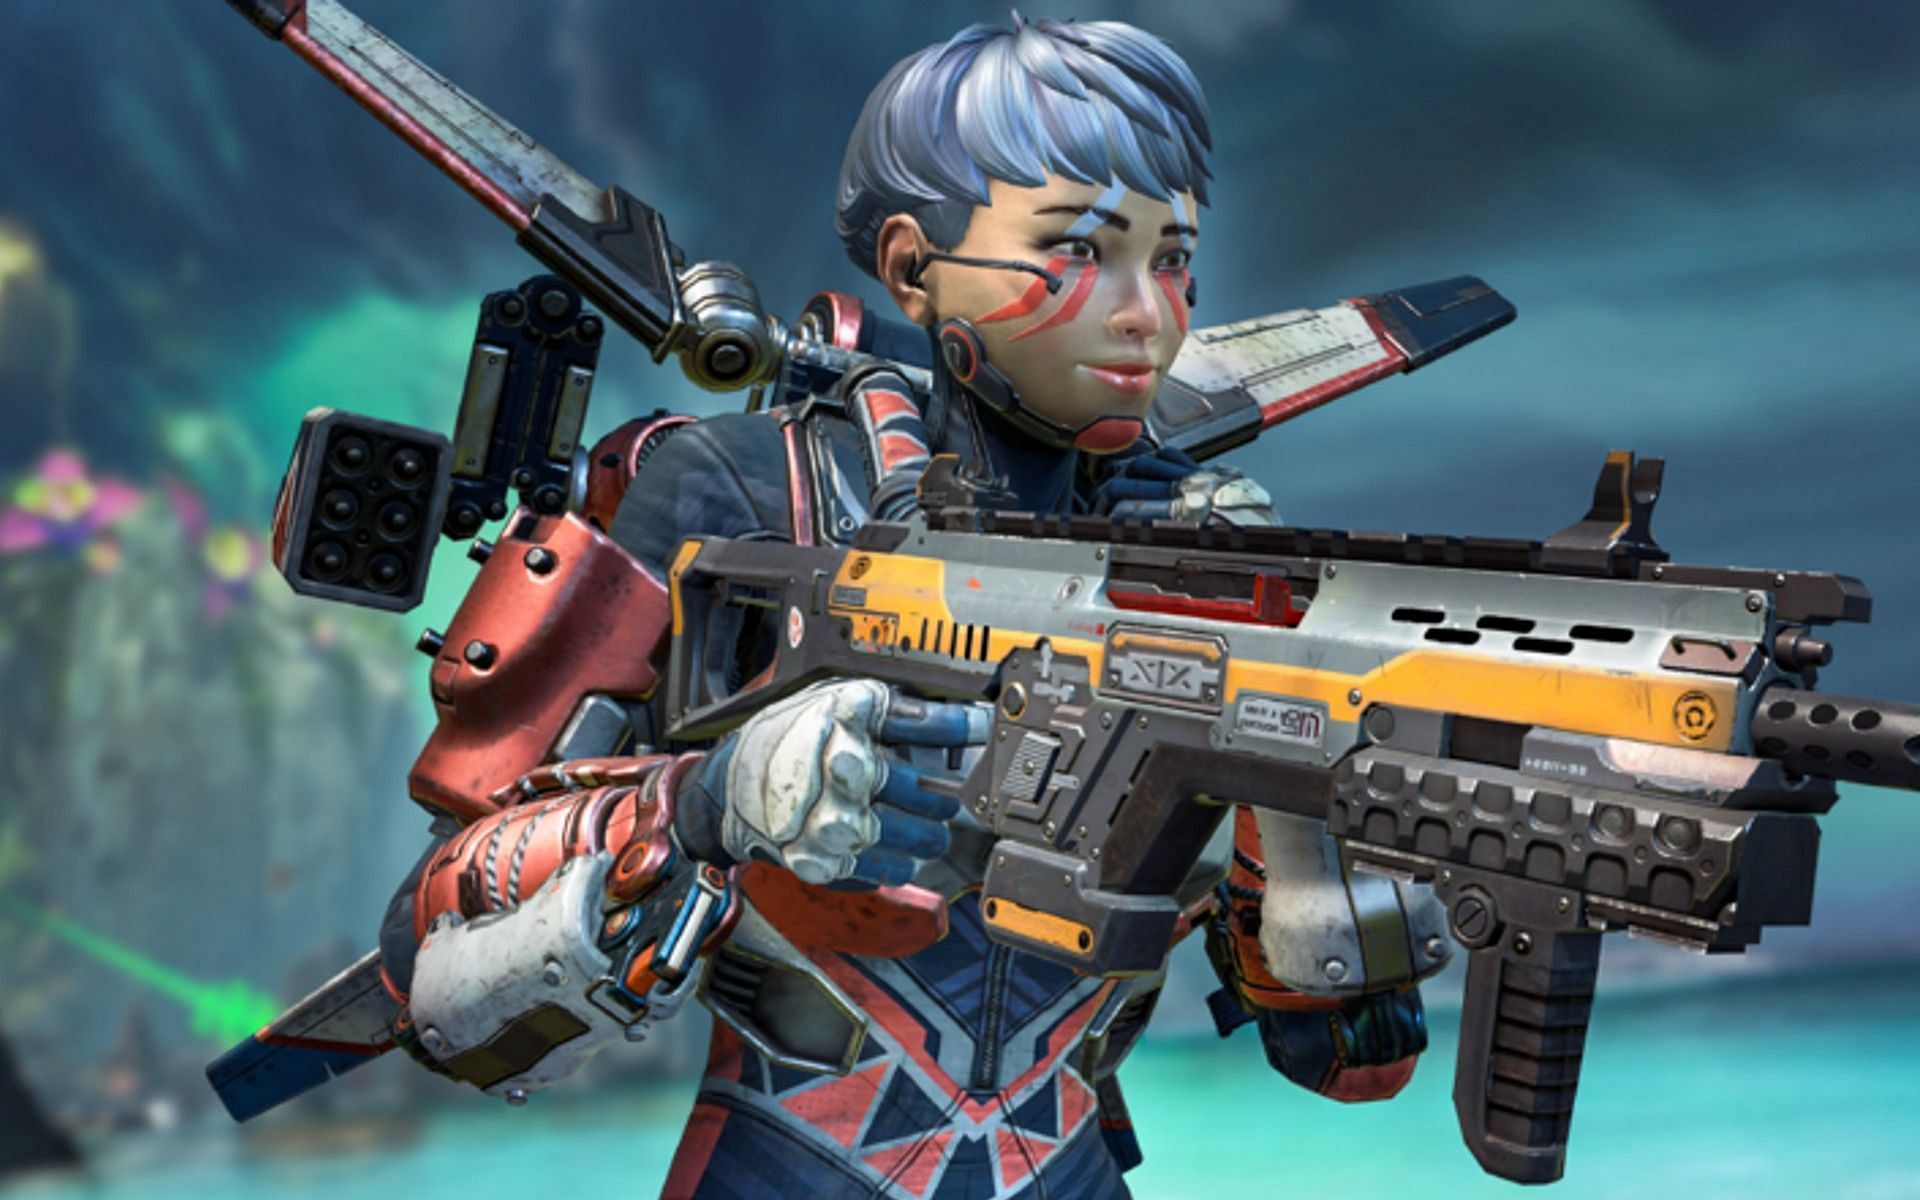 How to Change Your Apex Legends Name on PC or Console